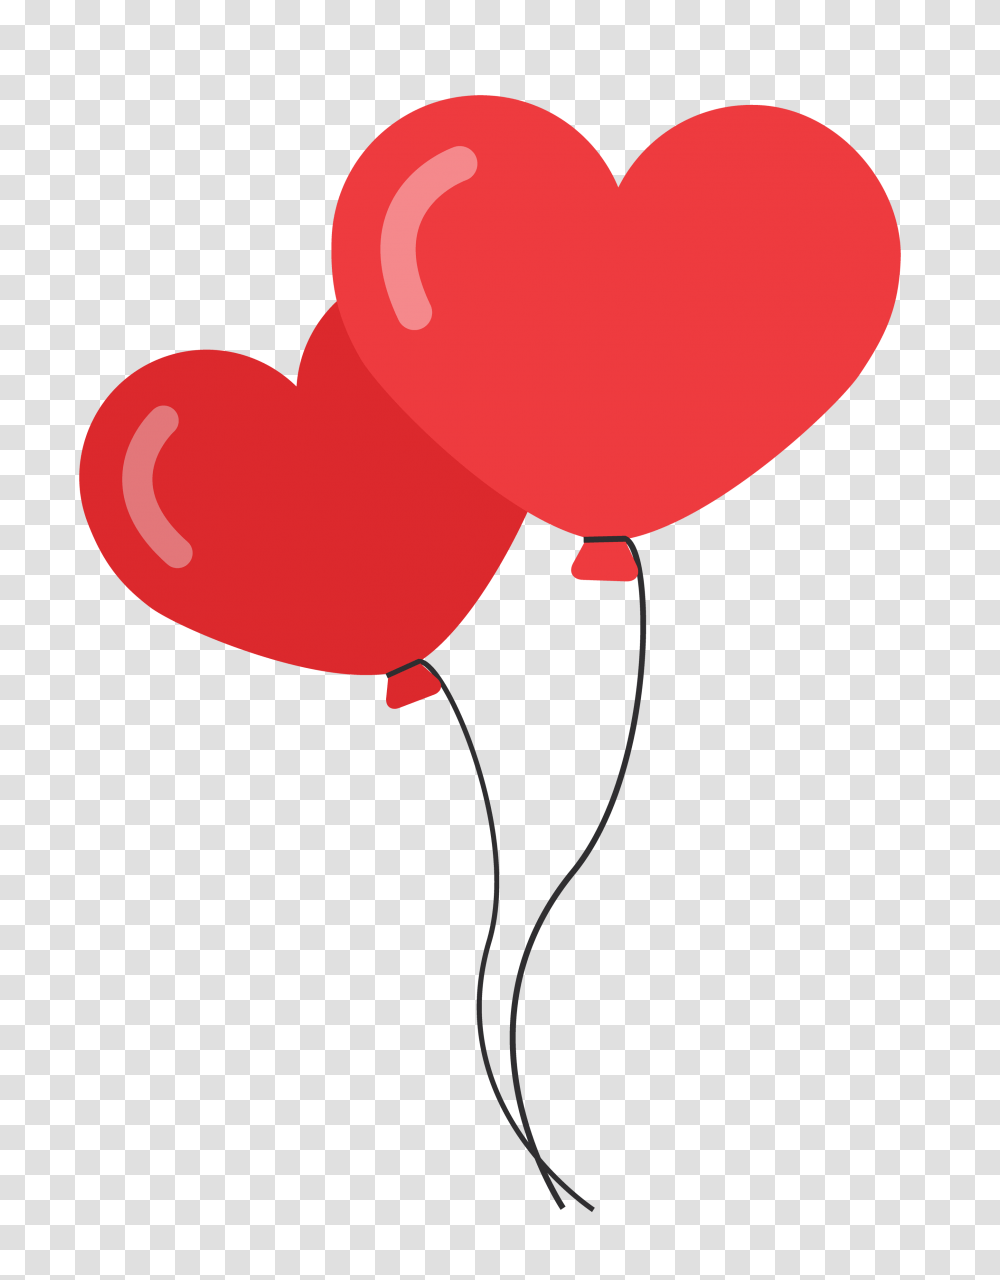 Download Free Heart Shaped Balloons Image Dlpngcom Heart Shaped Balloons, Pin Transparent Png